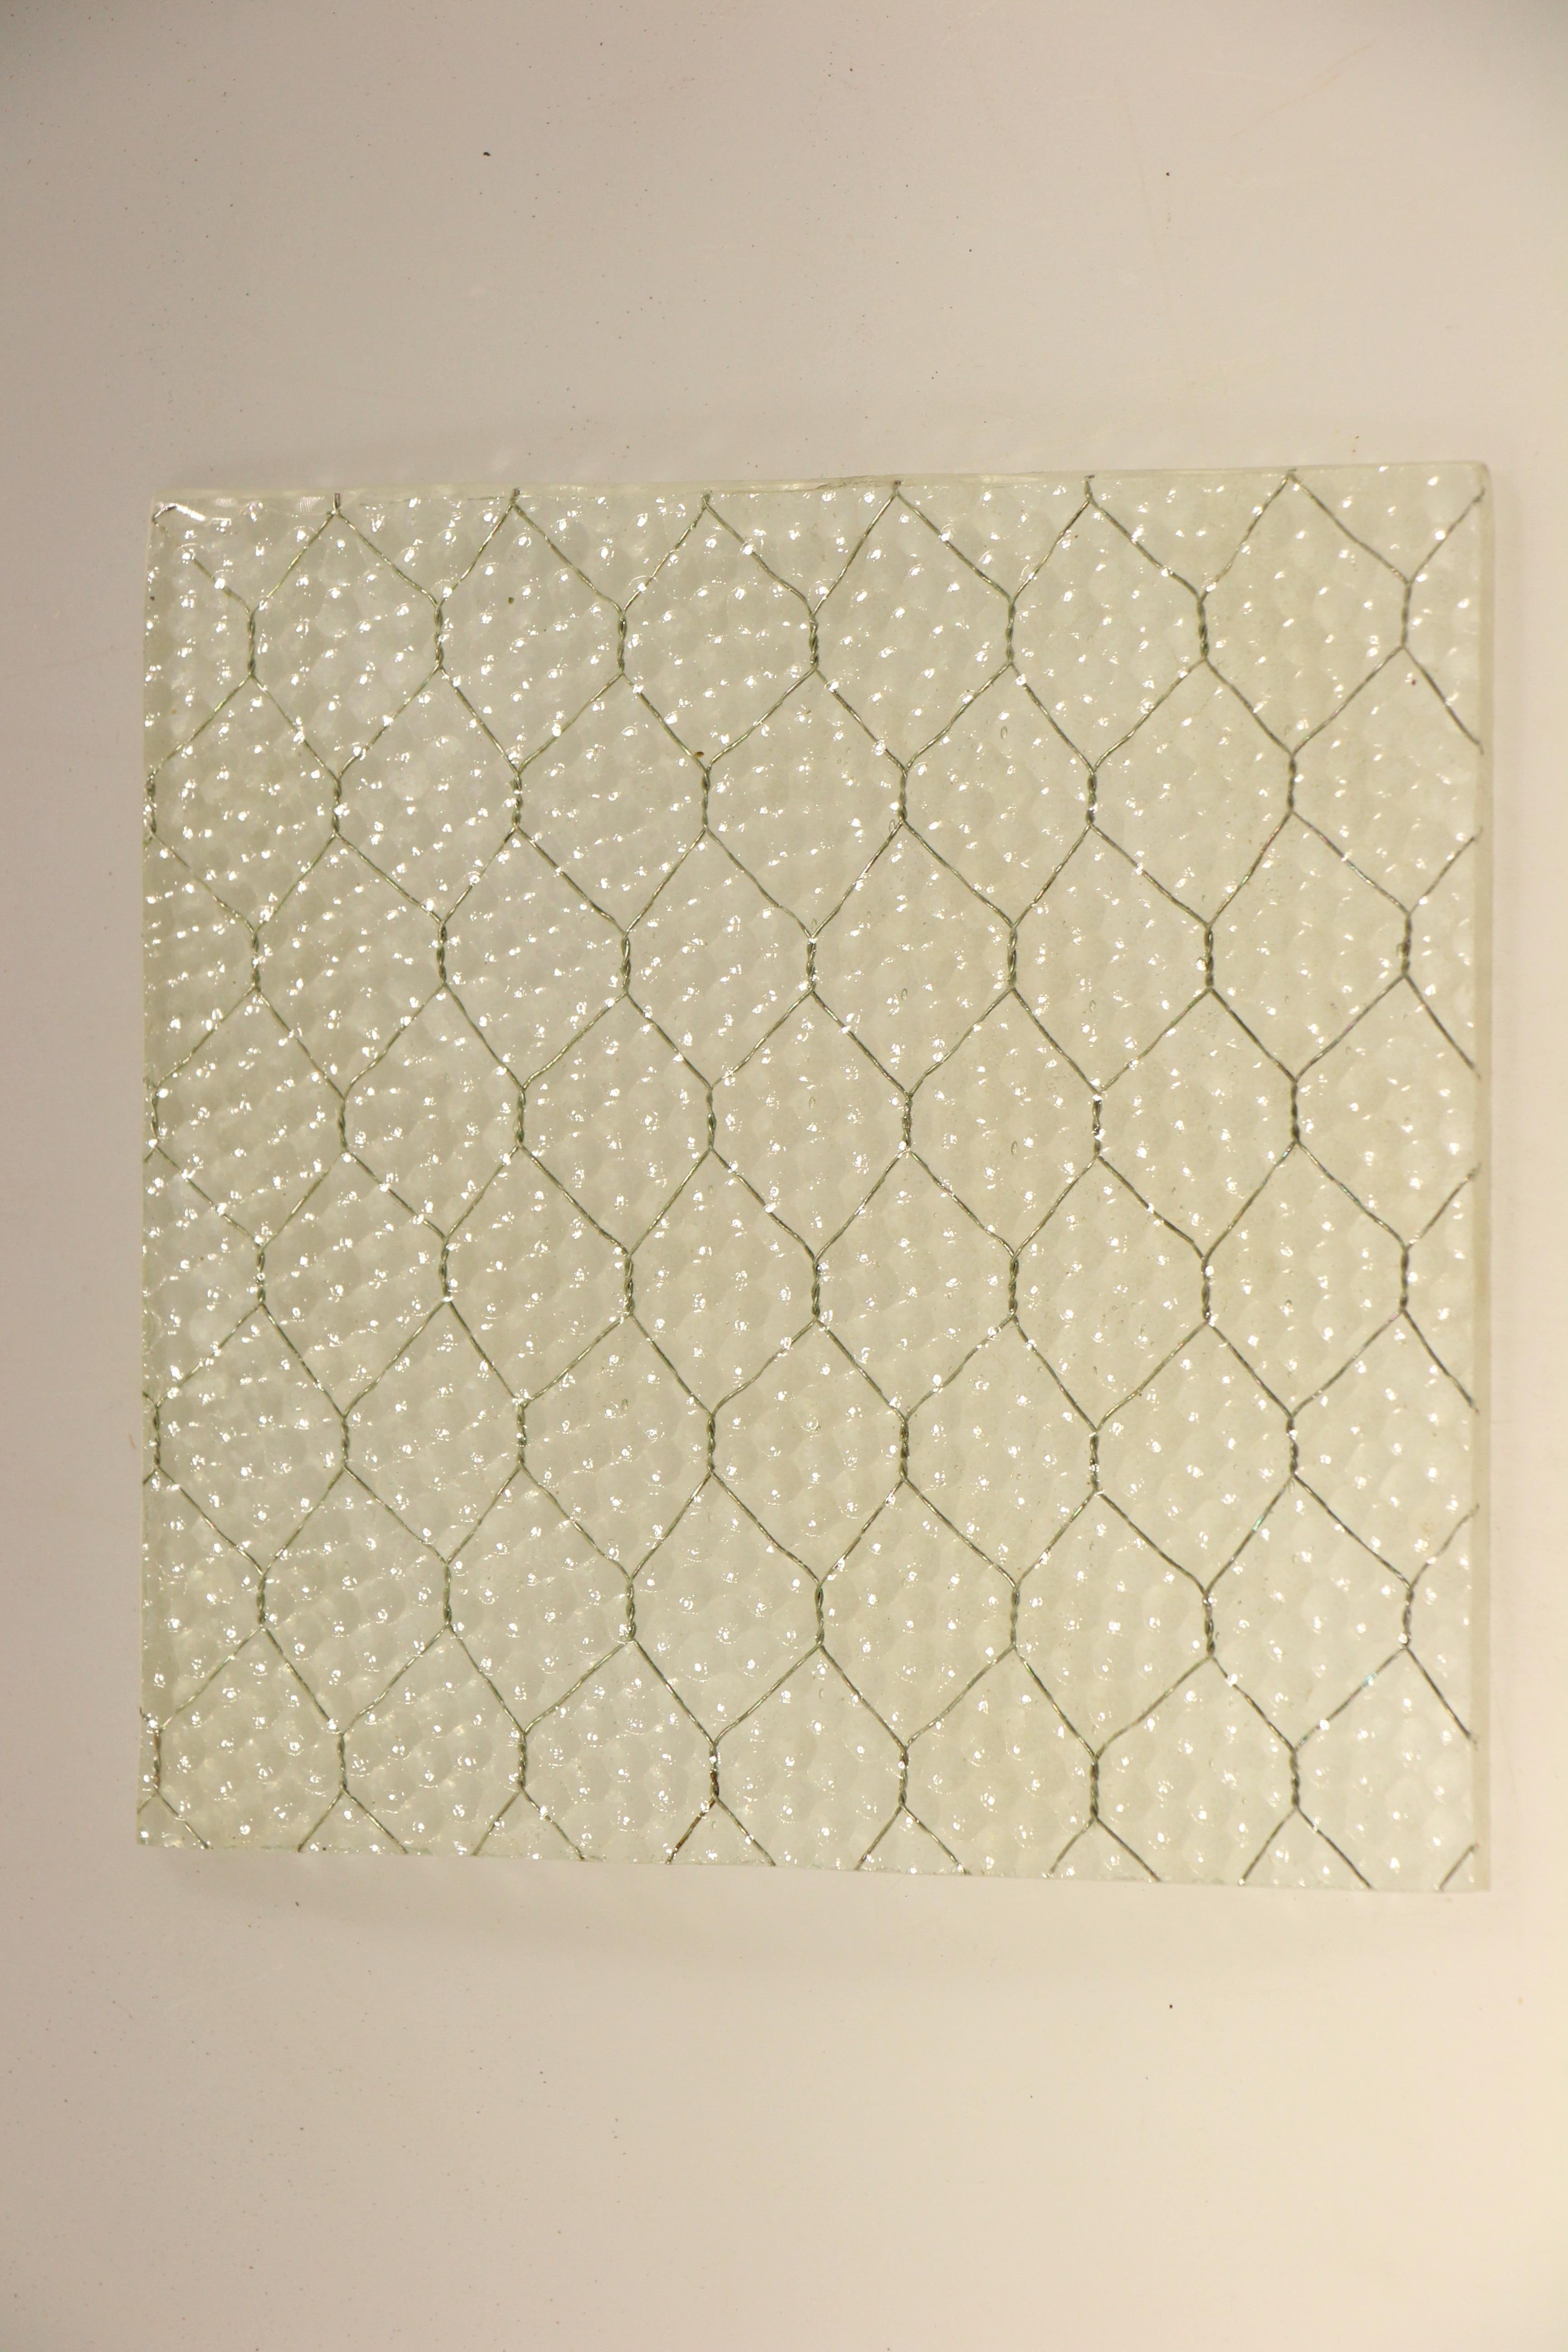 Custom order for one piece 17 3/4 inches wide by 34 1/4 inches high. 

1920s 'Pebbled' vintage chicken wire glass from Birdsboro, PA. Sizes are limited. Chicken wire glass was mainly used in commercial buildings; now it is used in modern design